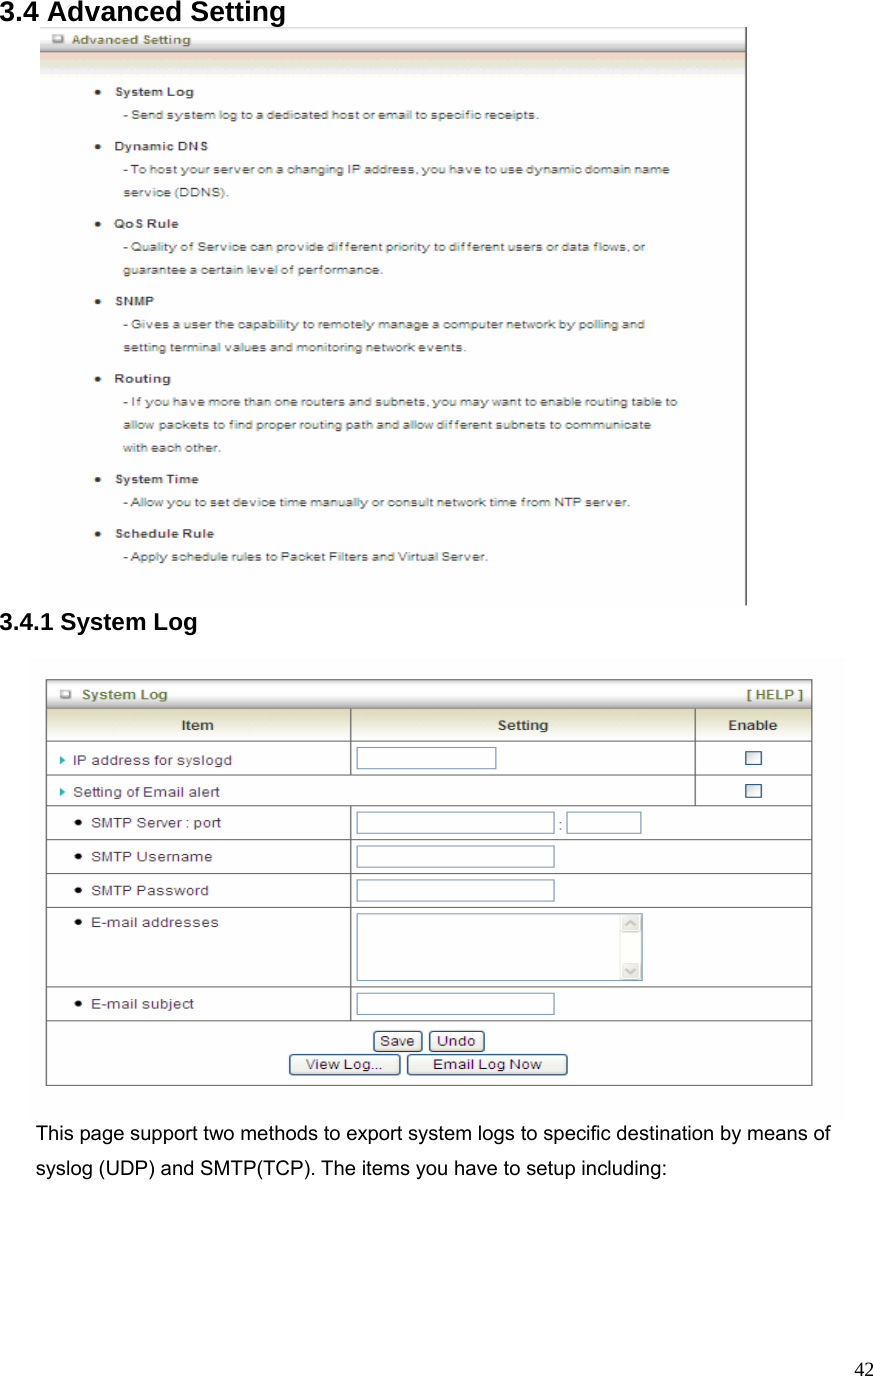  423.4 Advanced Setting       3.4.1 System Log   This page support two methods to export system logs to specific destination by means of syslog (UDP) and SMTP(TCP). The items you have to setup including:       